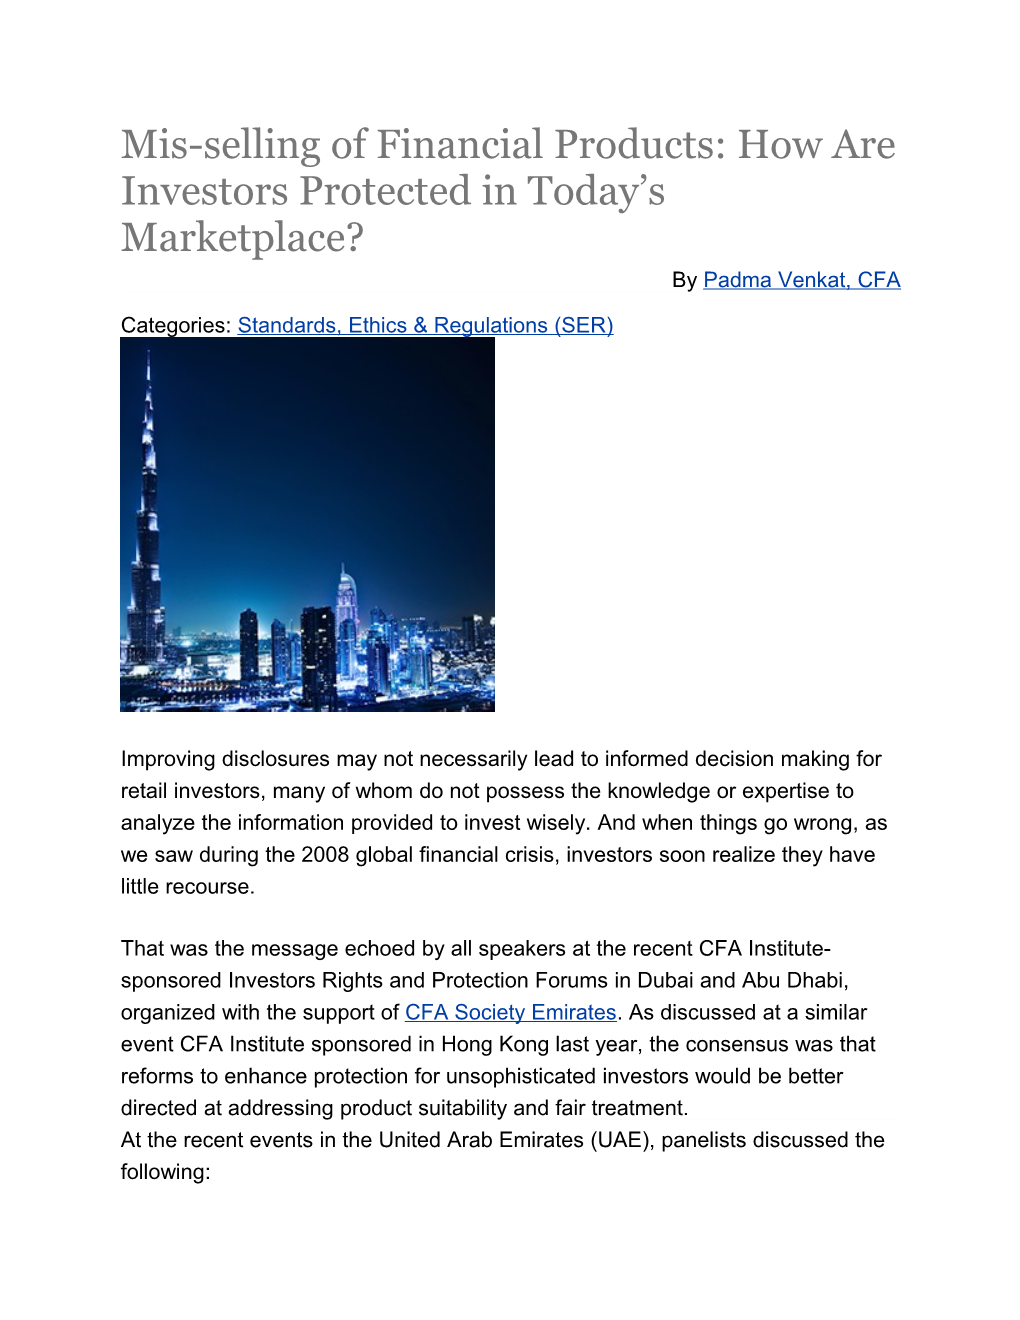 Mis-Selling of Financial Products: How Are Investors Protected in Today S Marketplace?